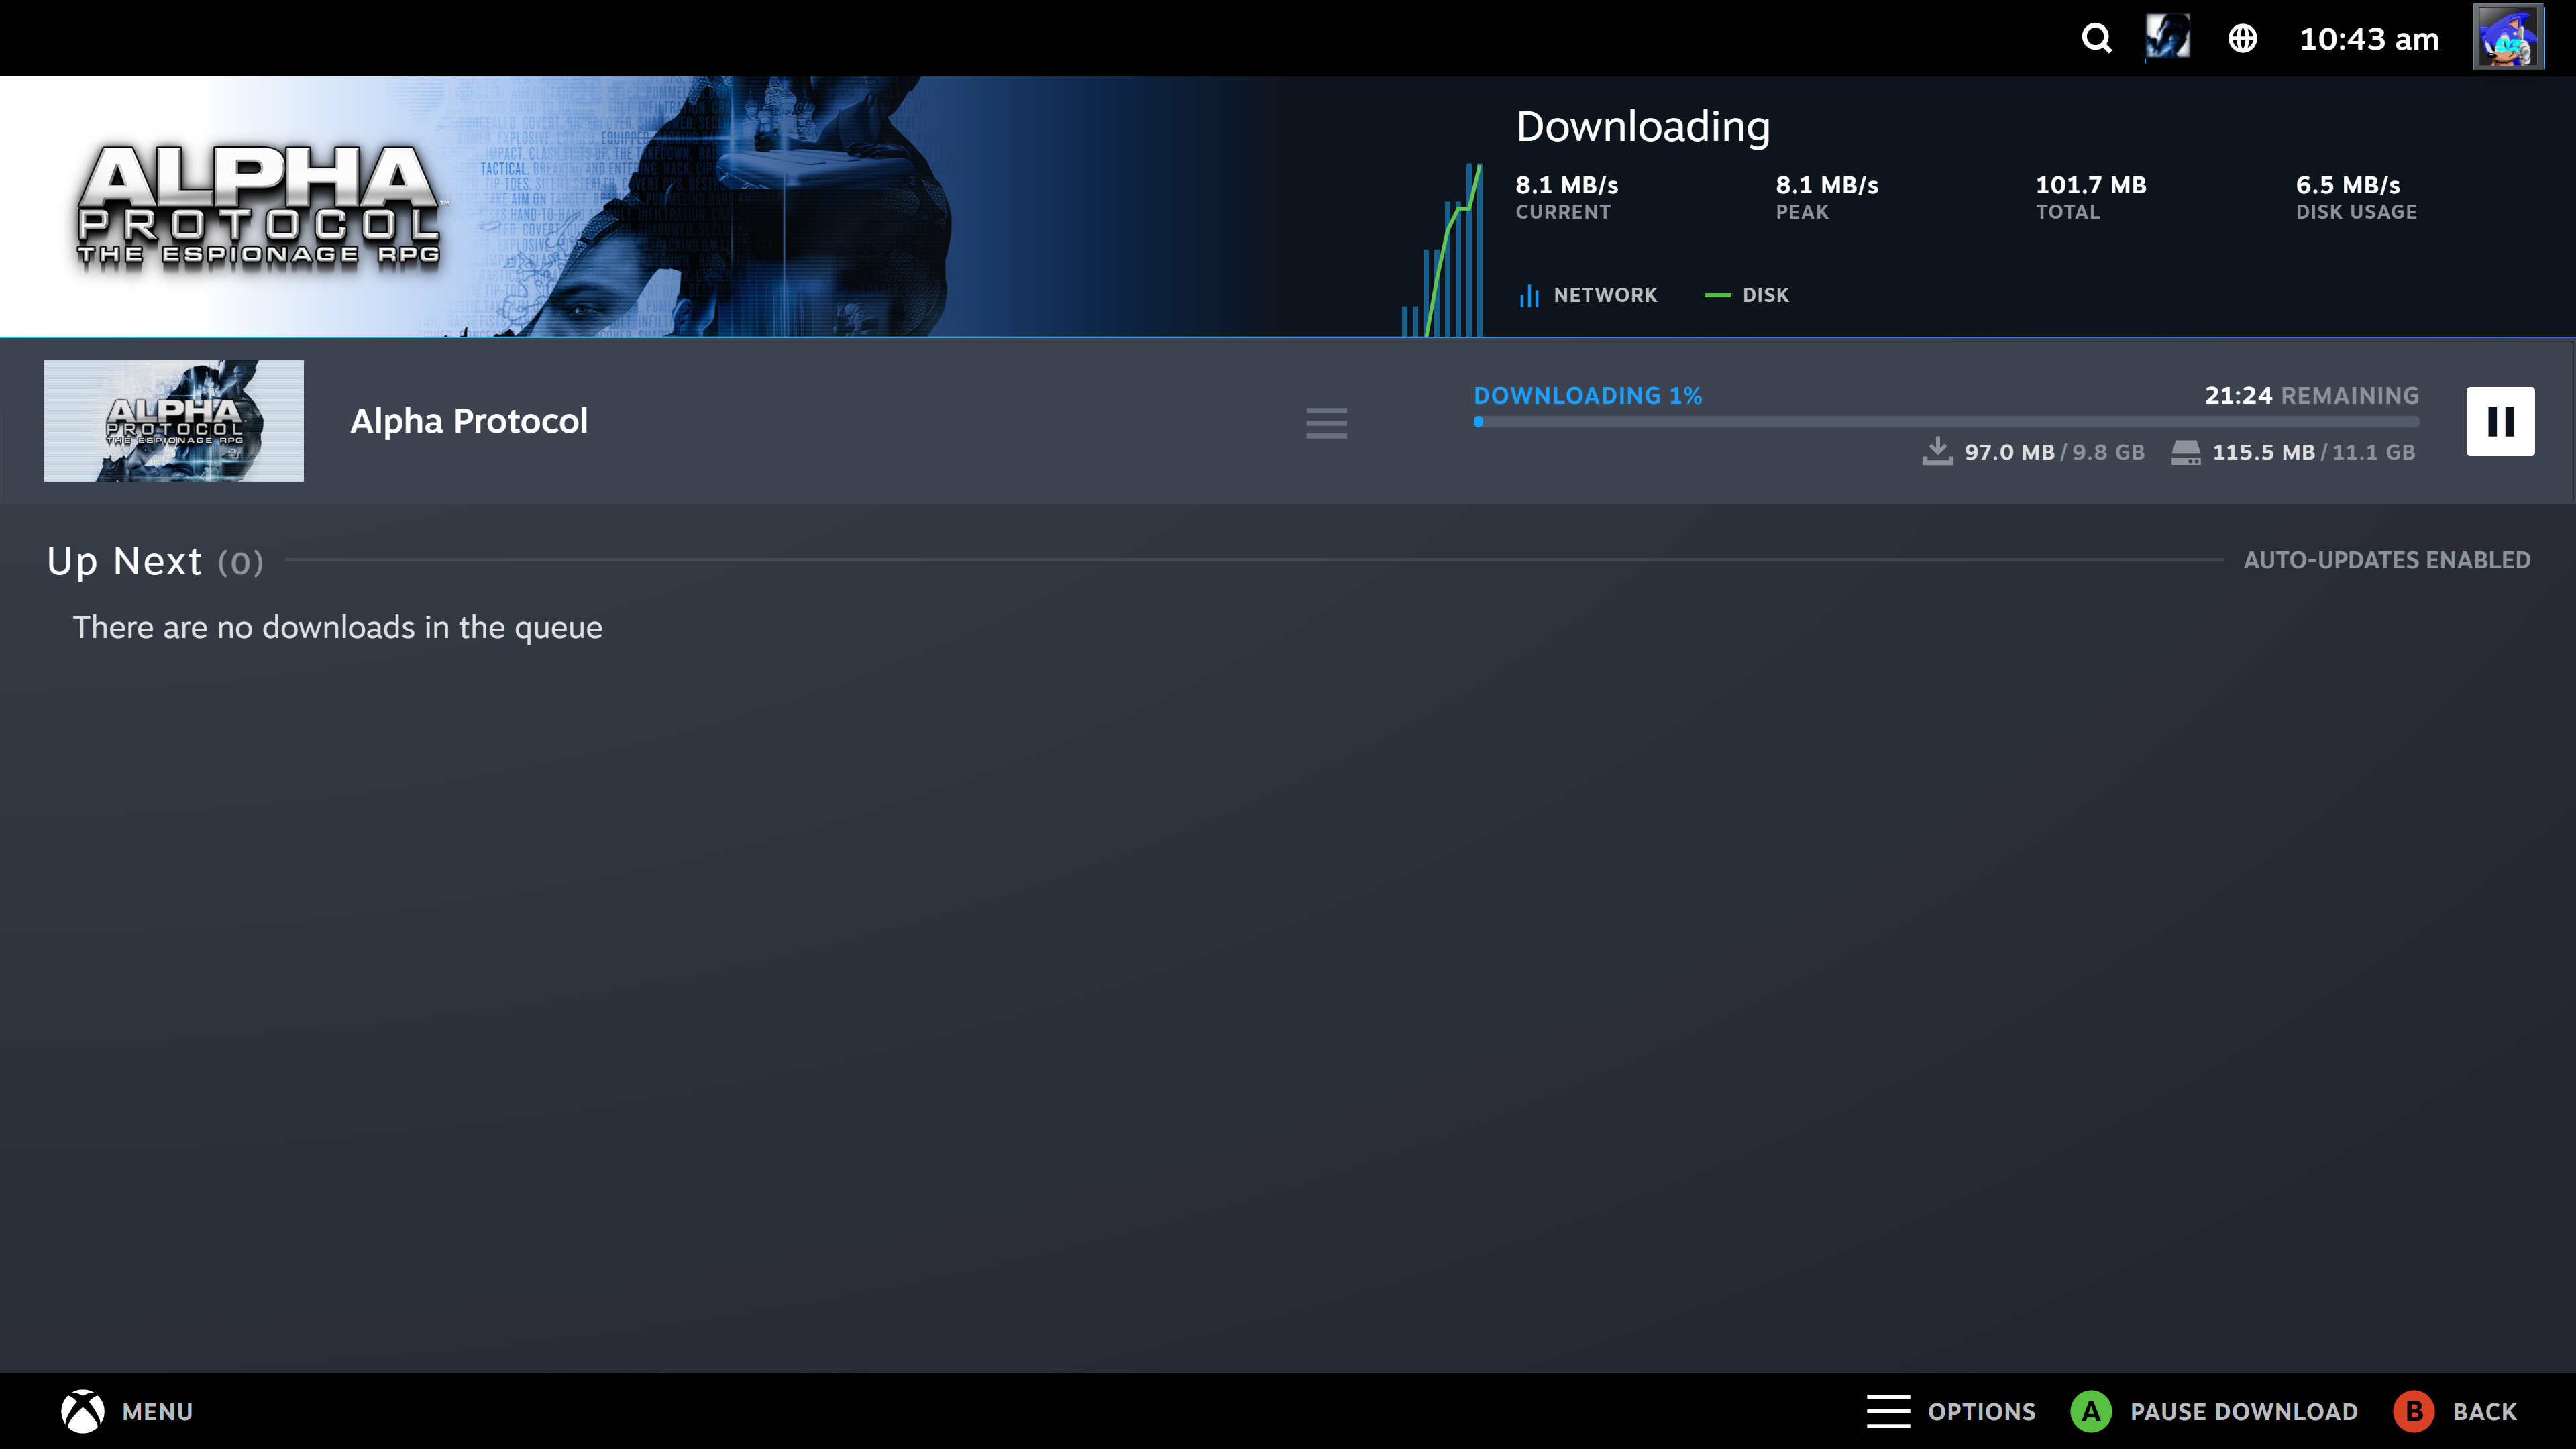 The Steam Big Picture UI showing an ongoing download for Alpha Protocol.